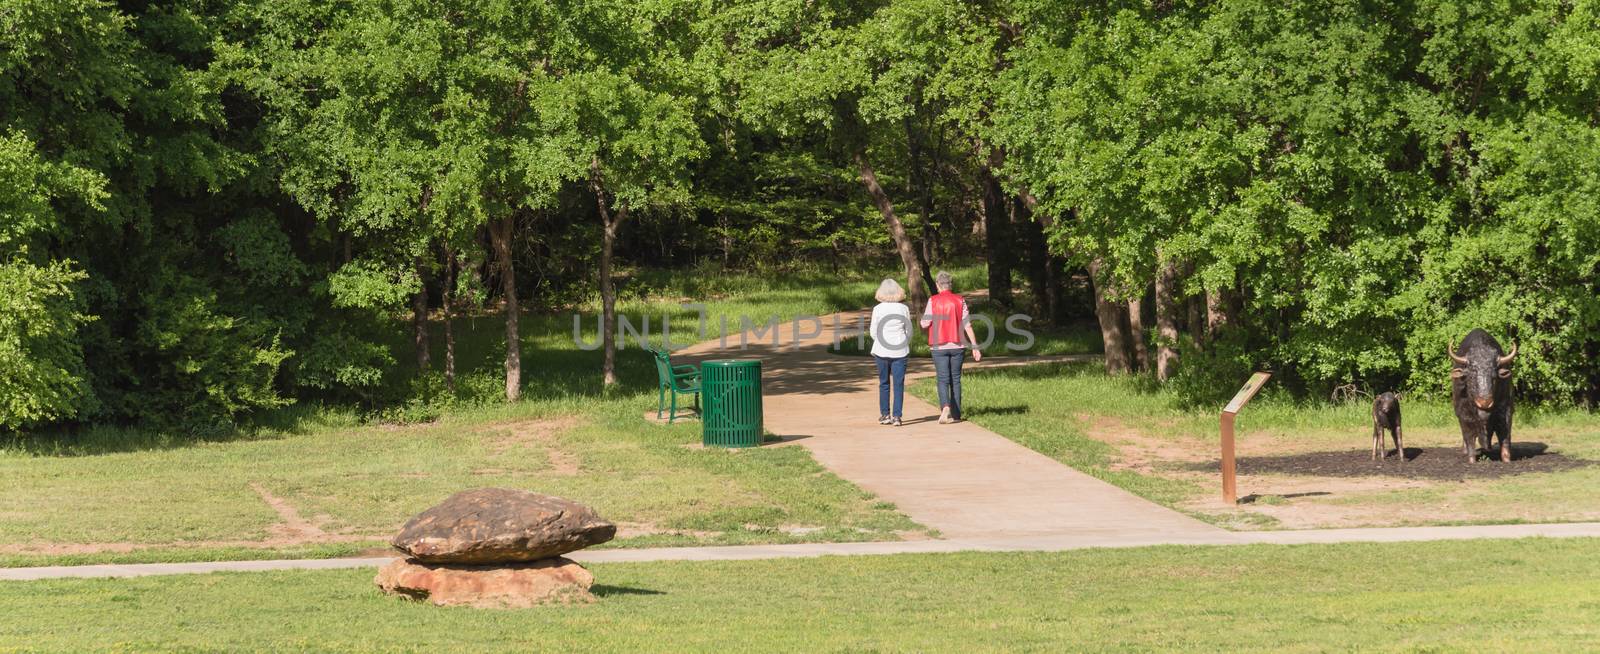 Panorama rear view of senior Caucasian female couple walking in the park. Nature recreation area with trail, trees, bench, trash bin and decorative landscape rock, boulder. Happy retirement concept